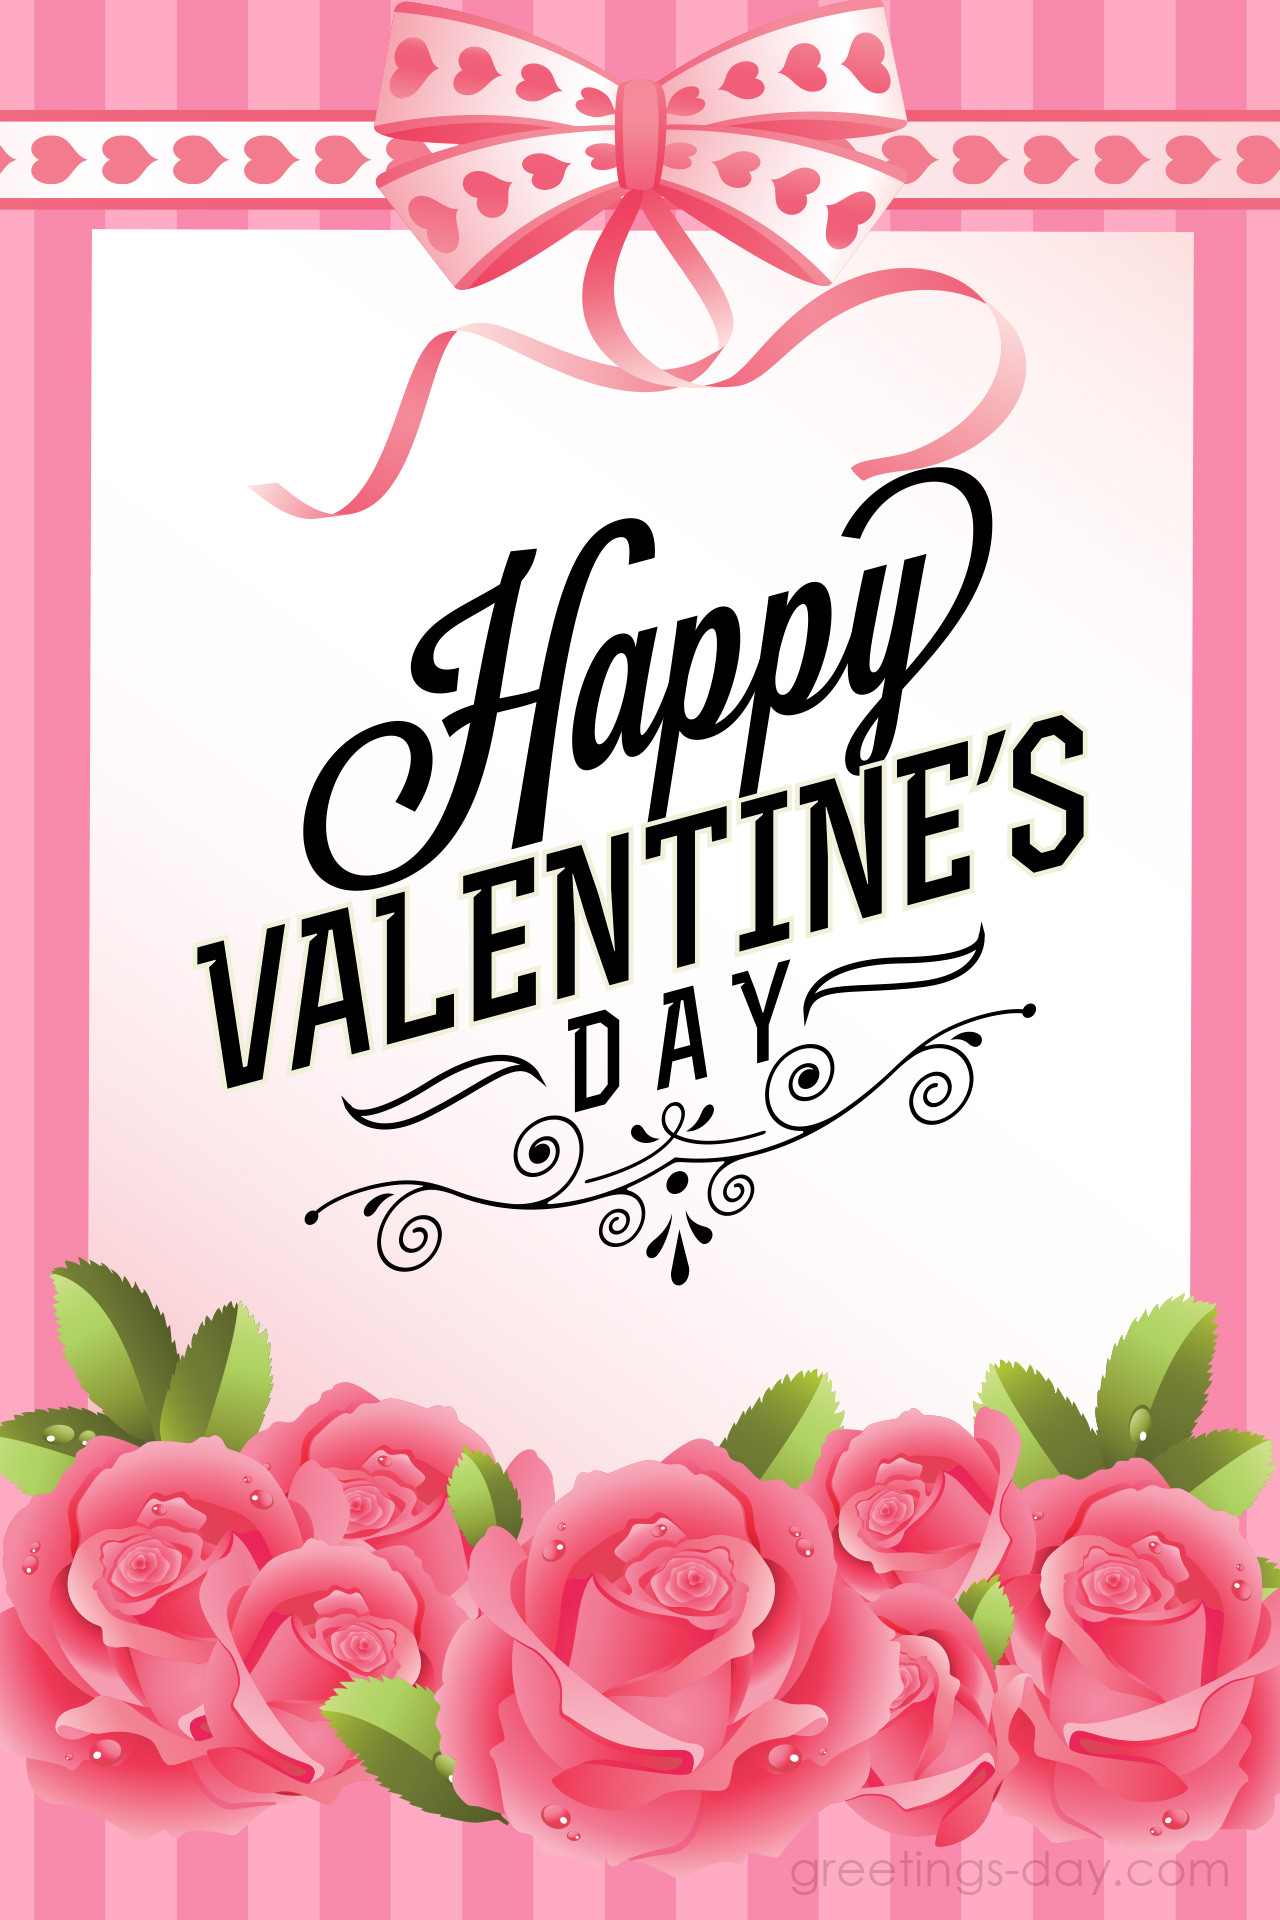 Valentines Day Quotes for Family Inspirational Valentine S Day Quotes and Flowers for Friends and Family